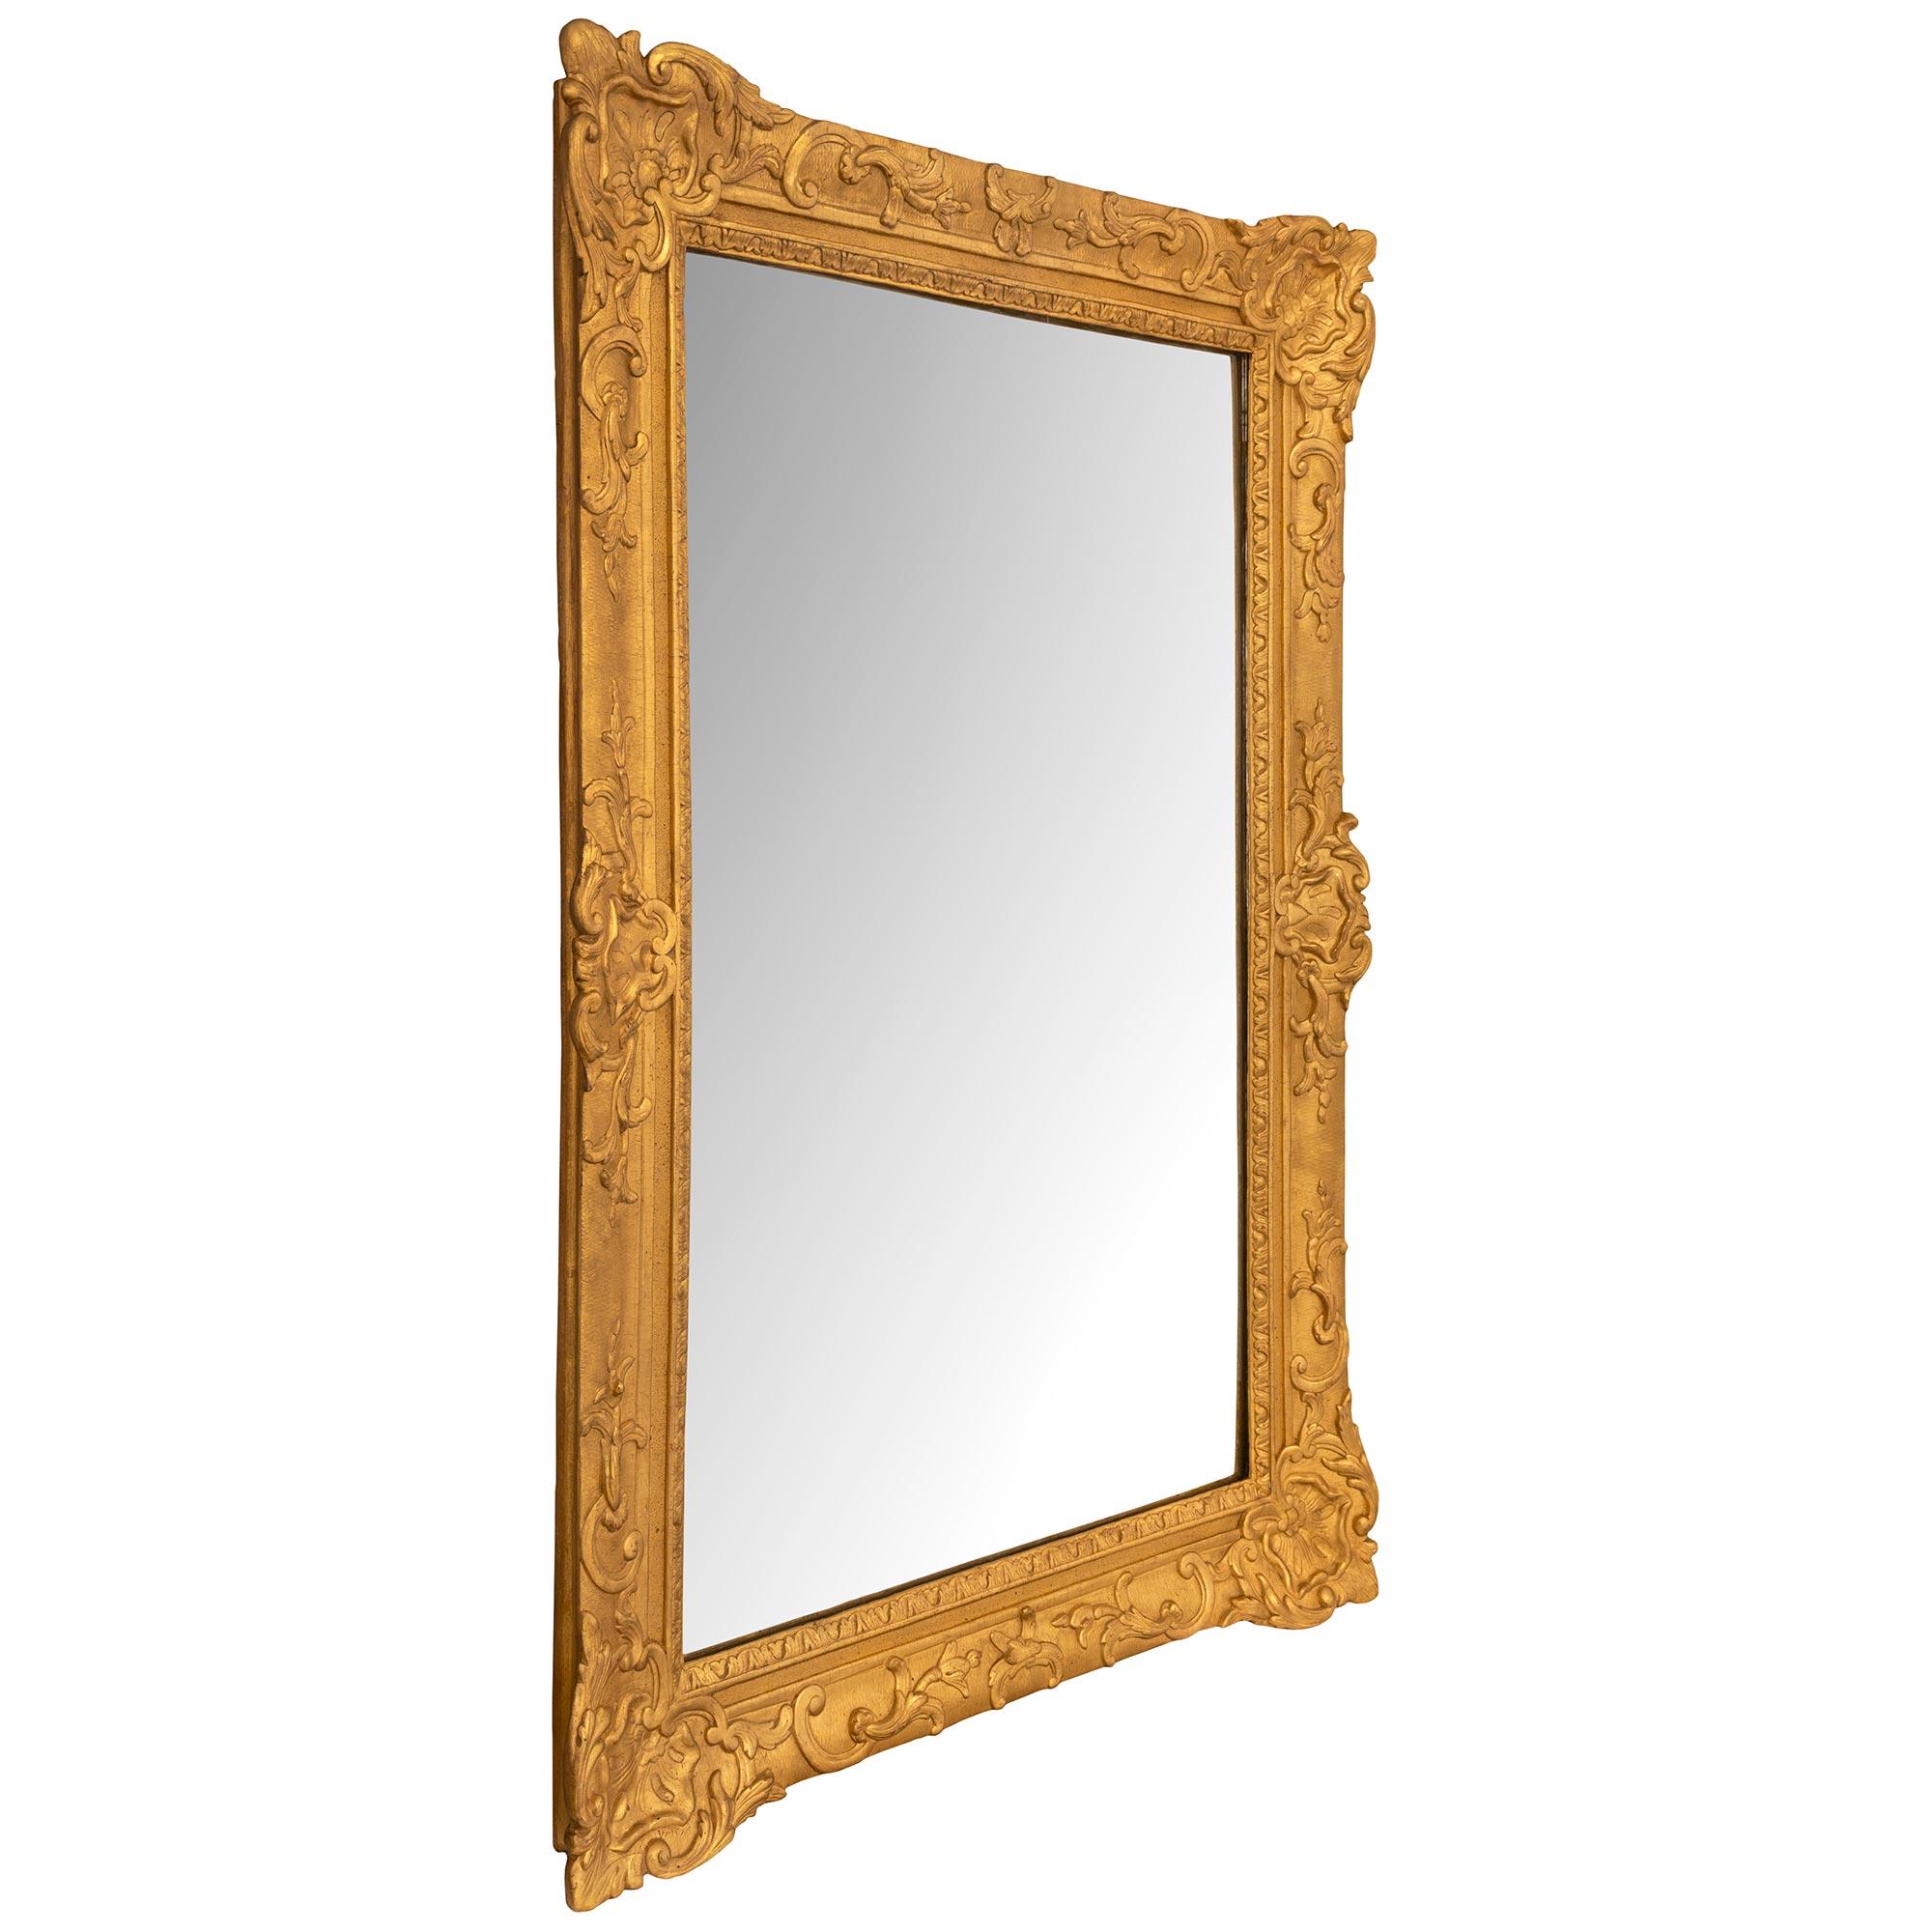 Regency A French 18th century Regence period rectangular giltwood mirror For Sale